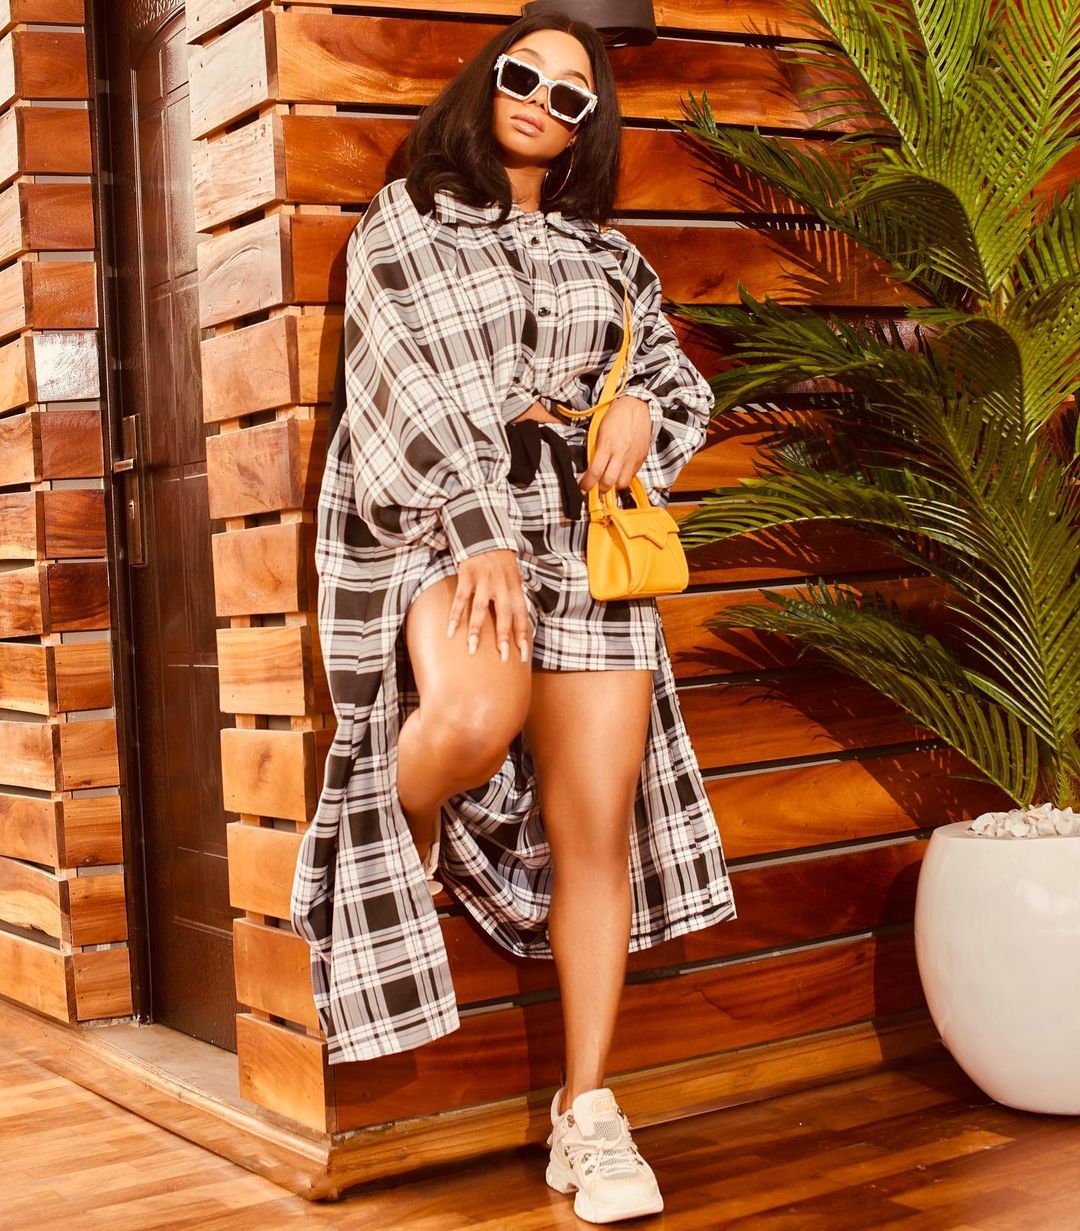 Protest will give ladies husband this year more than Shiloh – Toke Makinwa claims